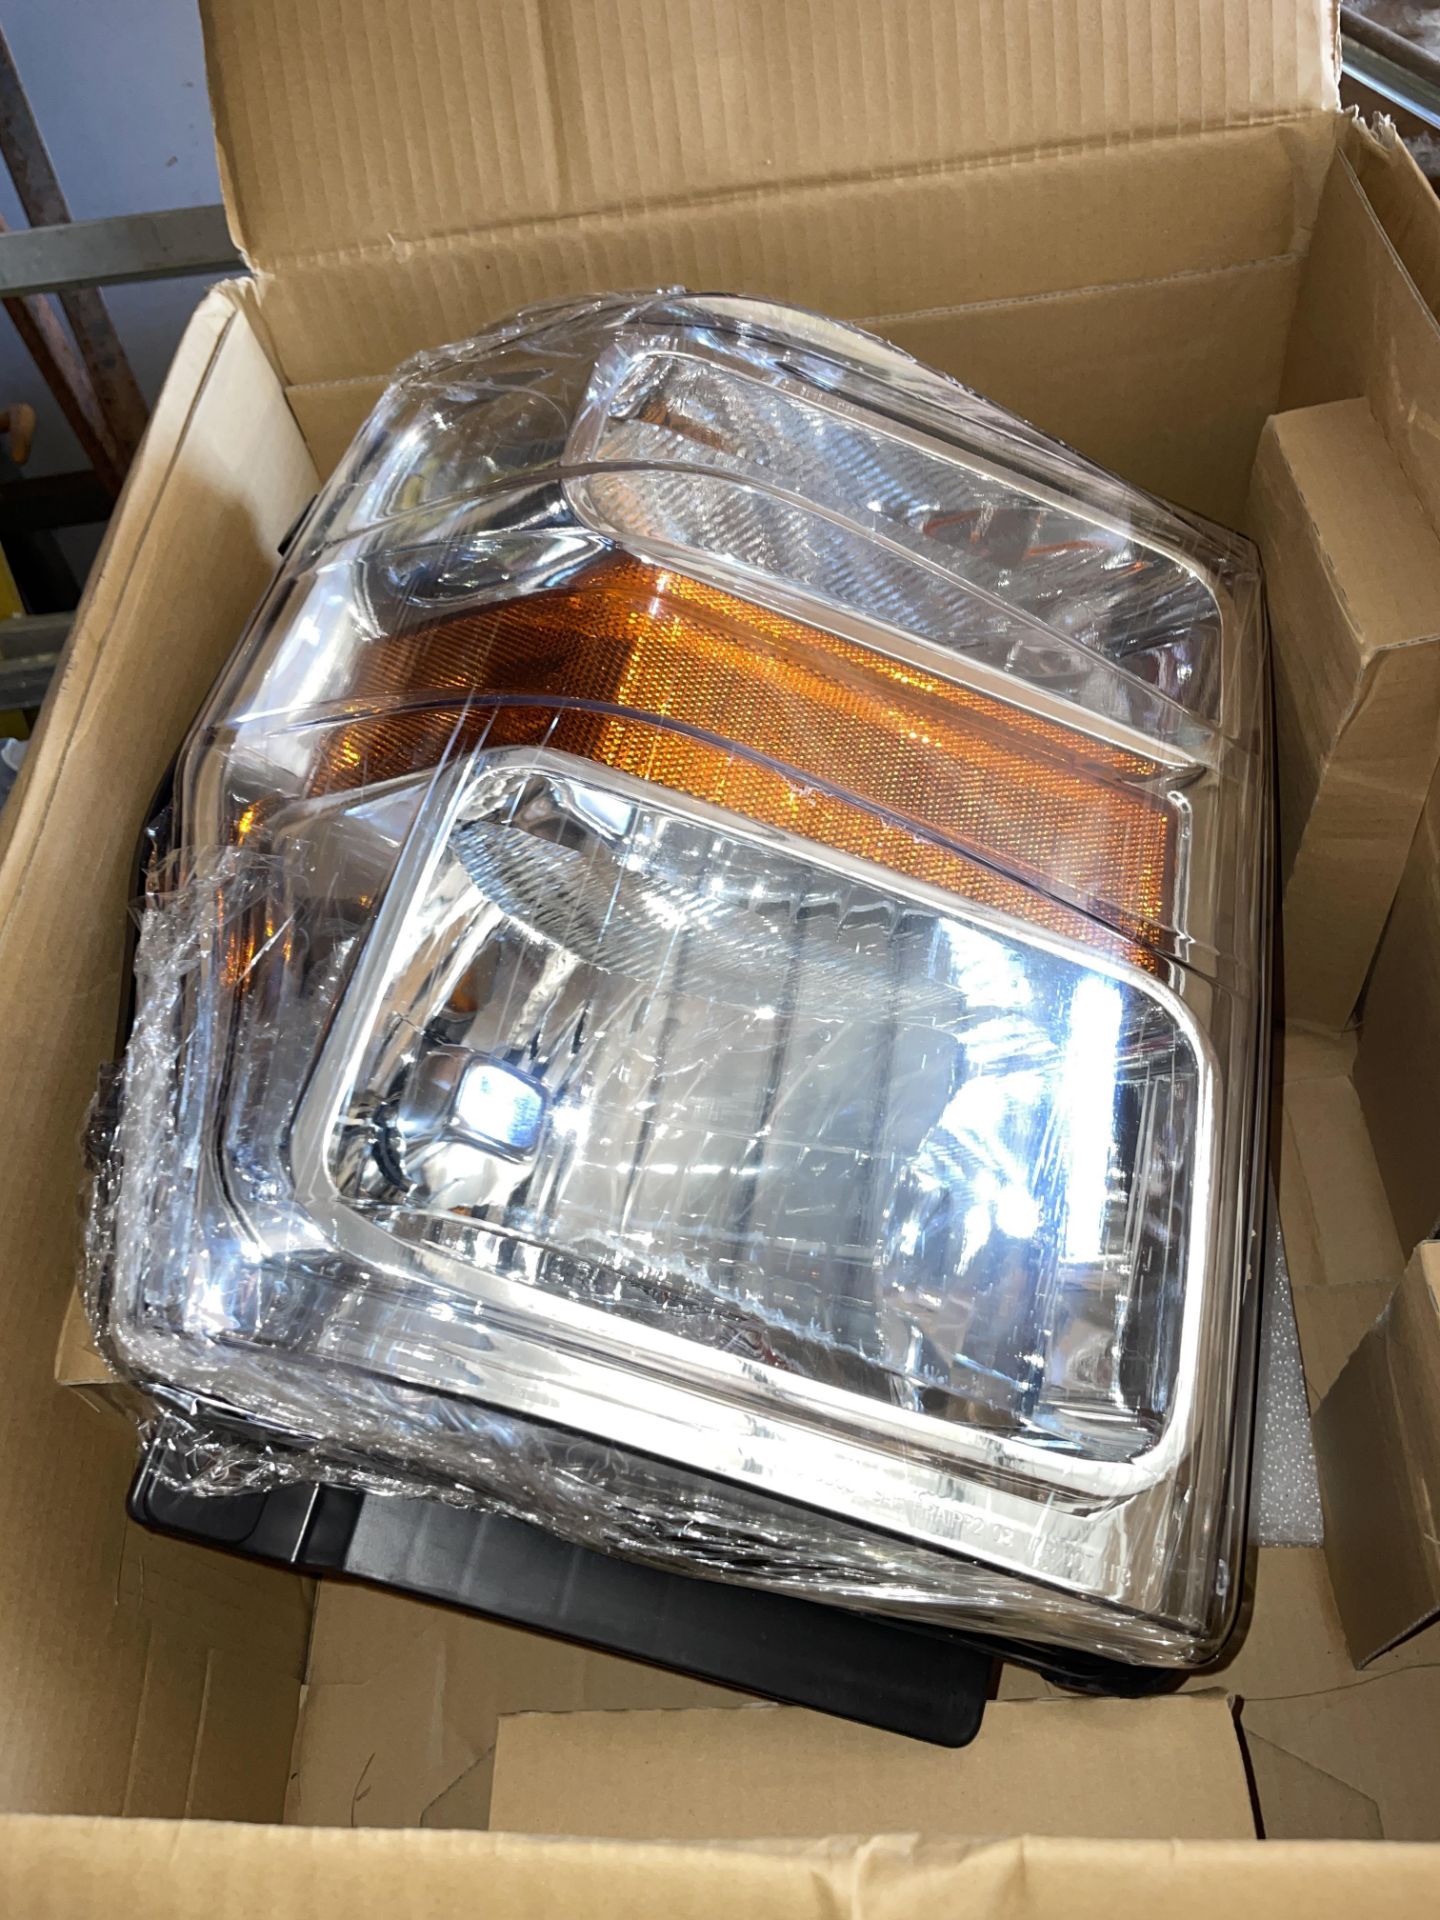 (NIB) Ford Pick Up Truck Headlight, Mirror and Fender - Image 2 of 3